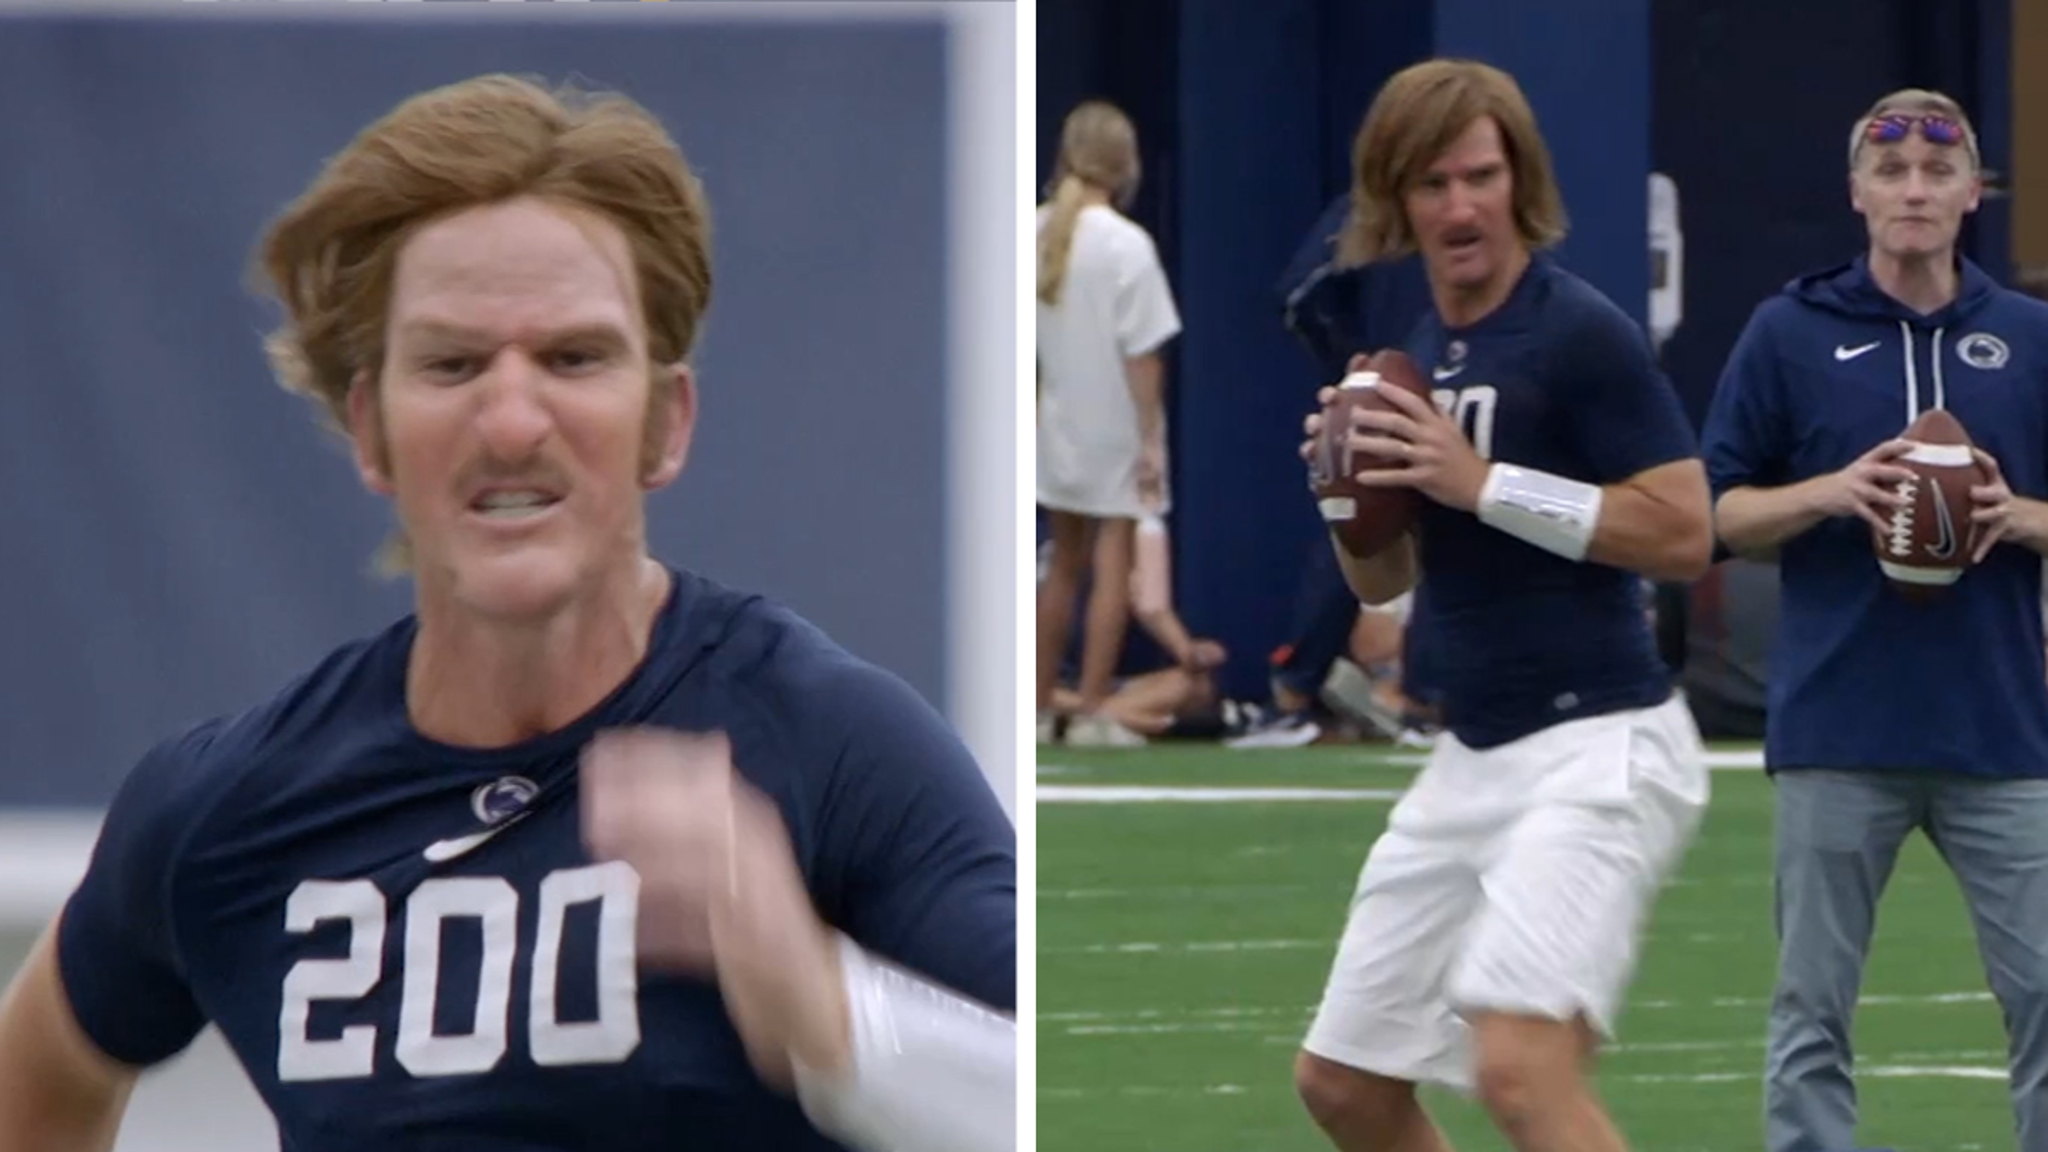 Eli Manning Cakes On Makeup, Dons Wig To ‘Try Out’ For Penn State Football Team